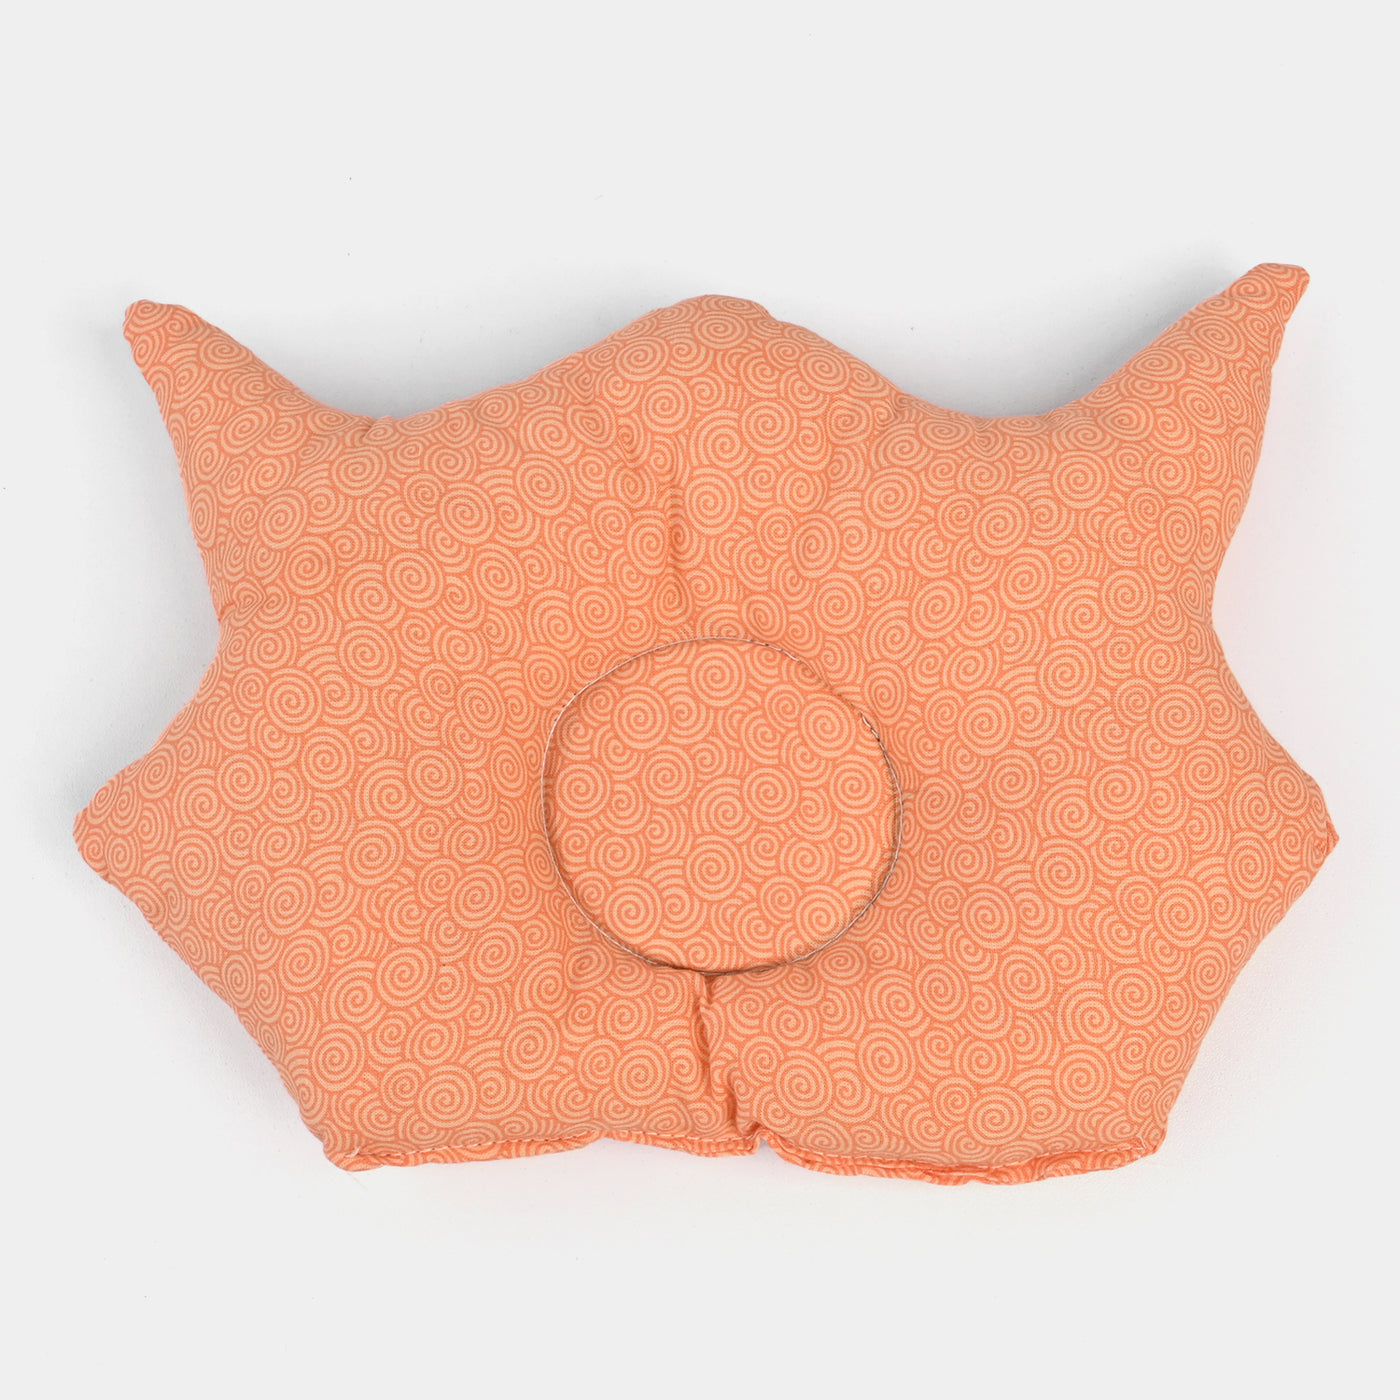 Little Baby Crown Pillow